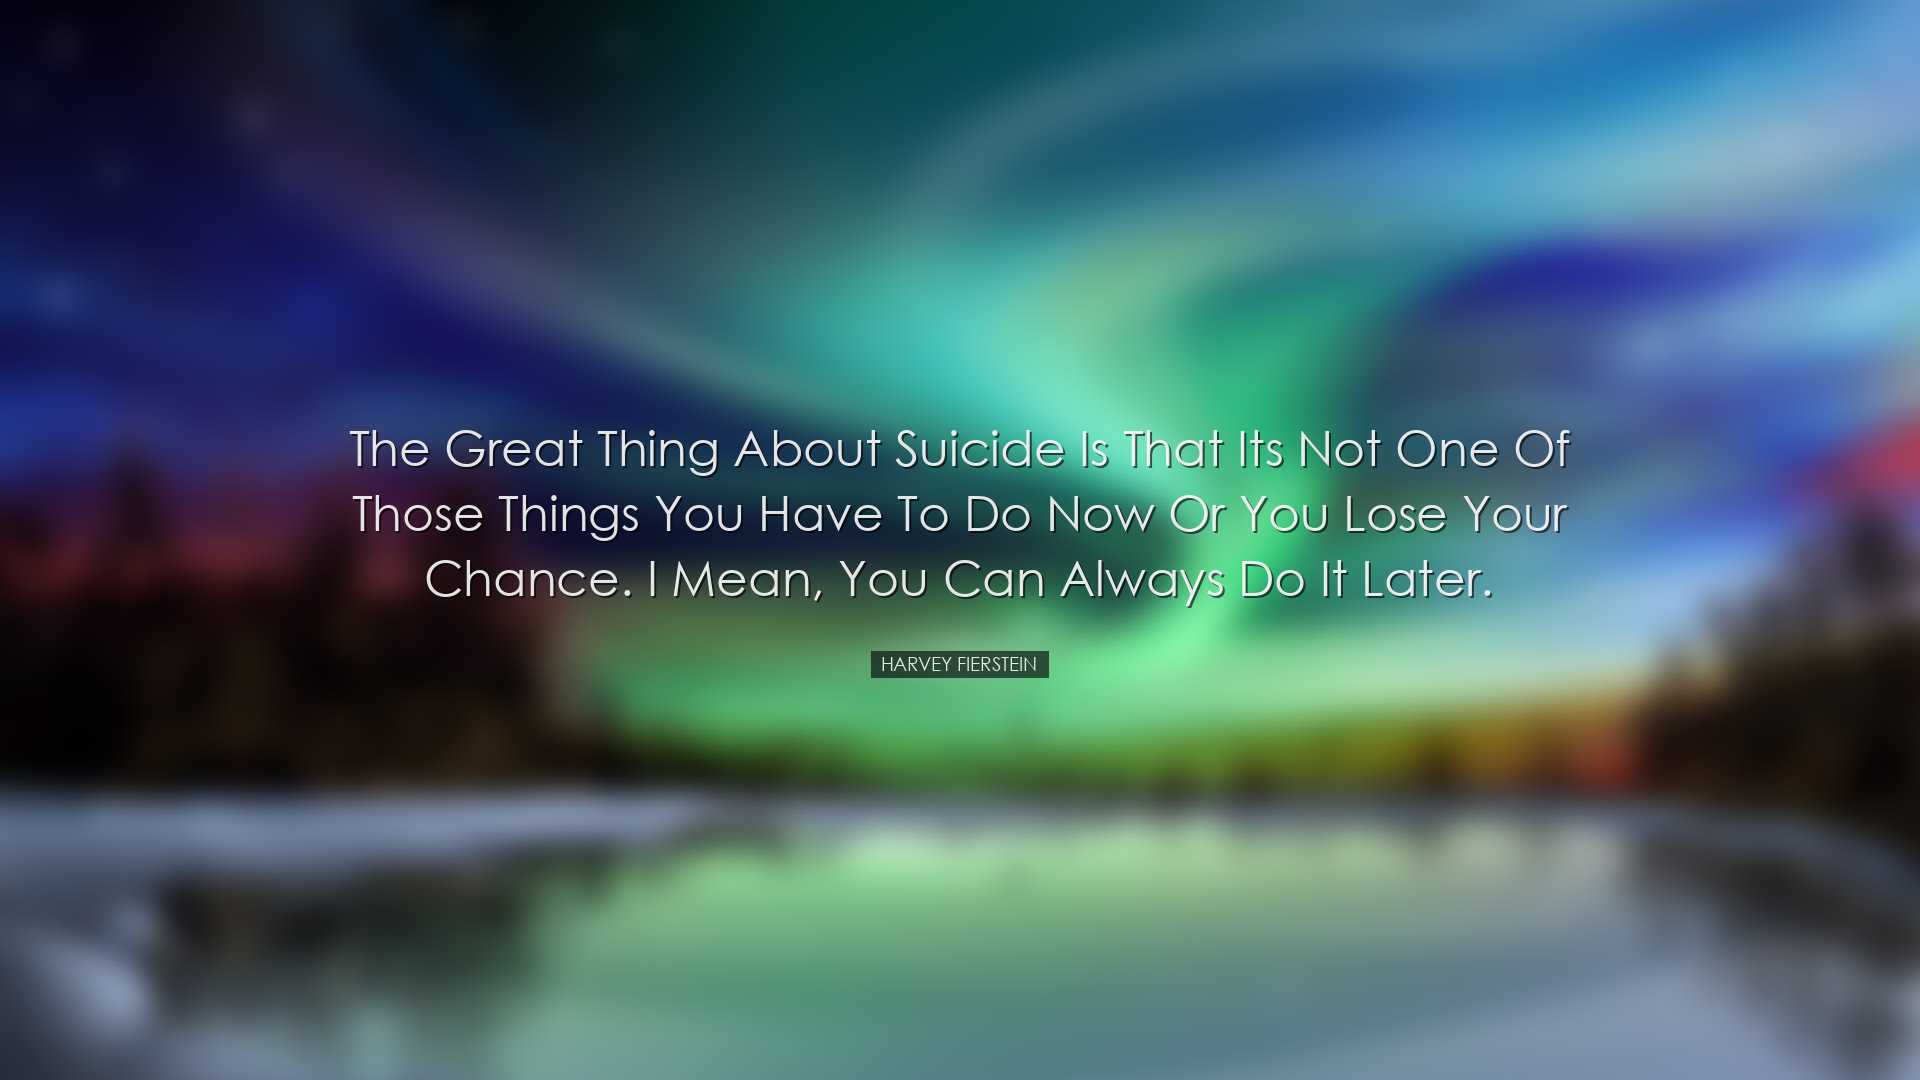 The great thing about suicide is that its not one of those things